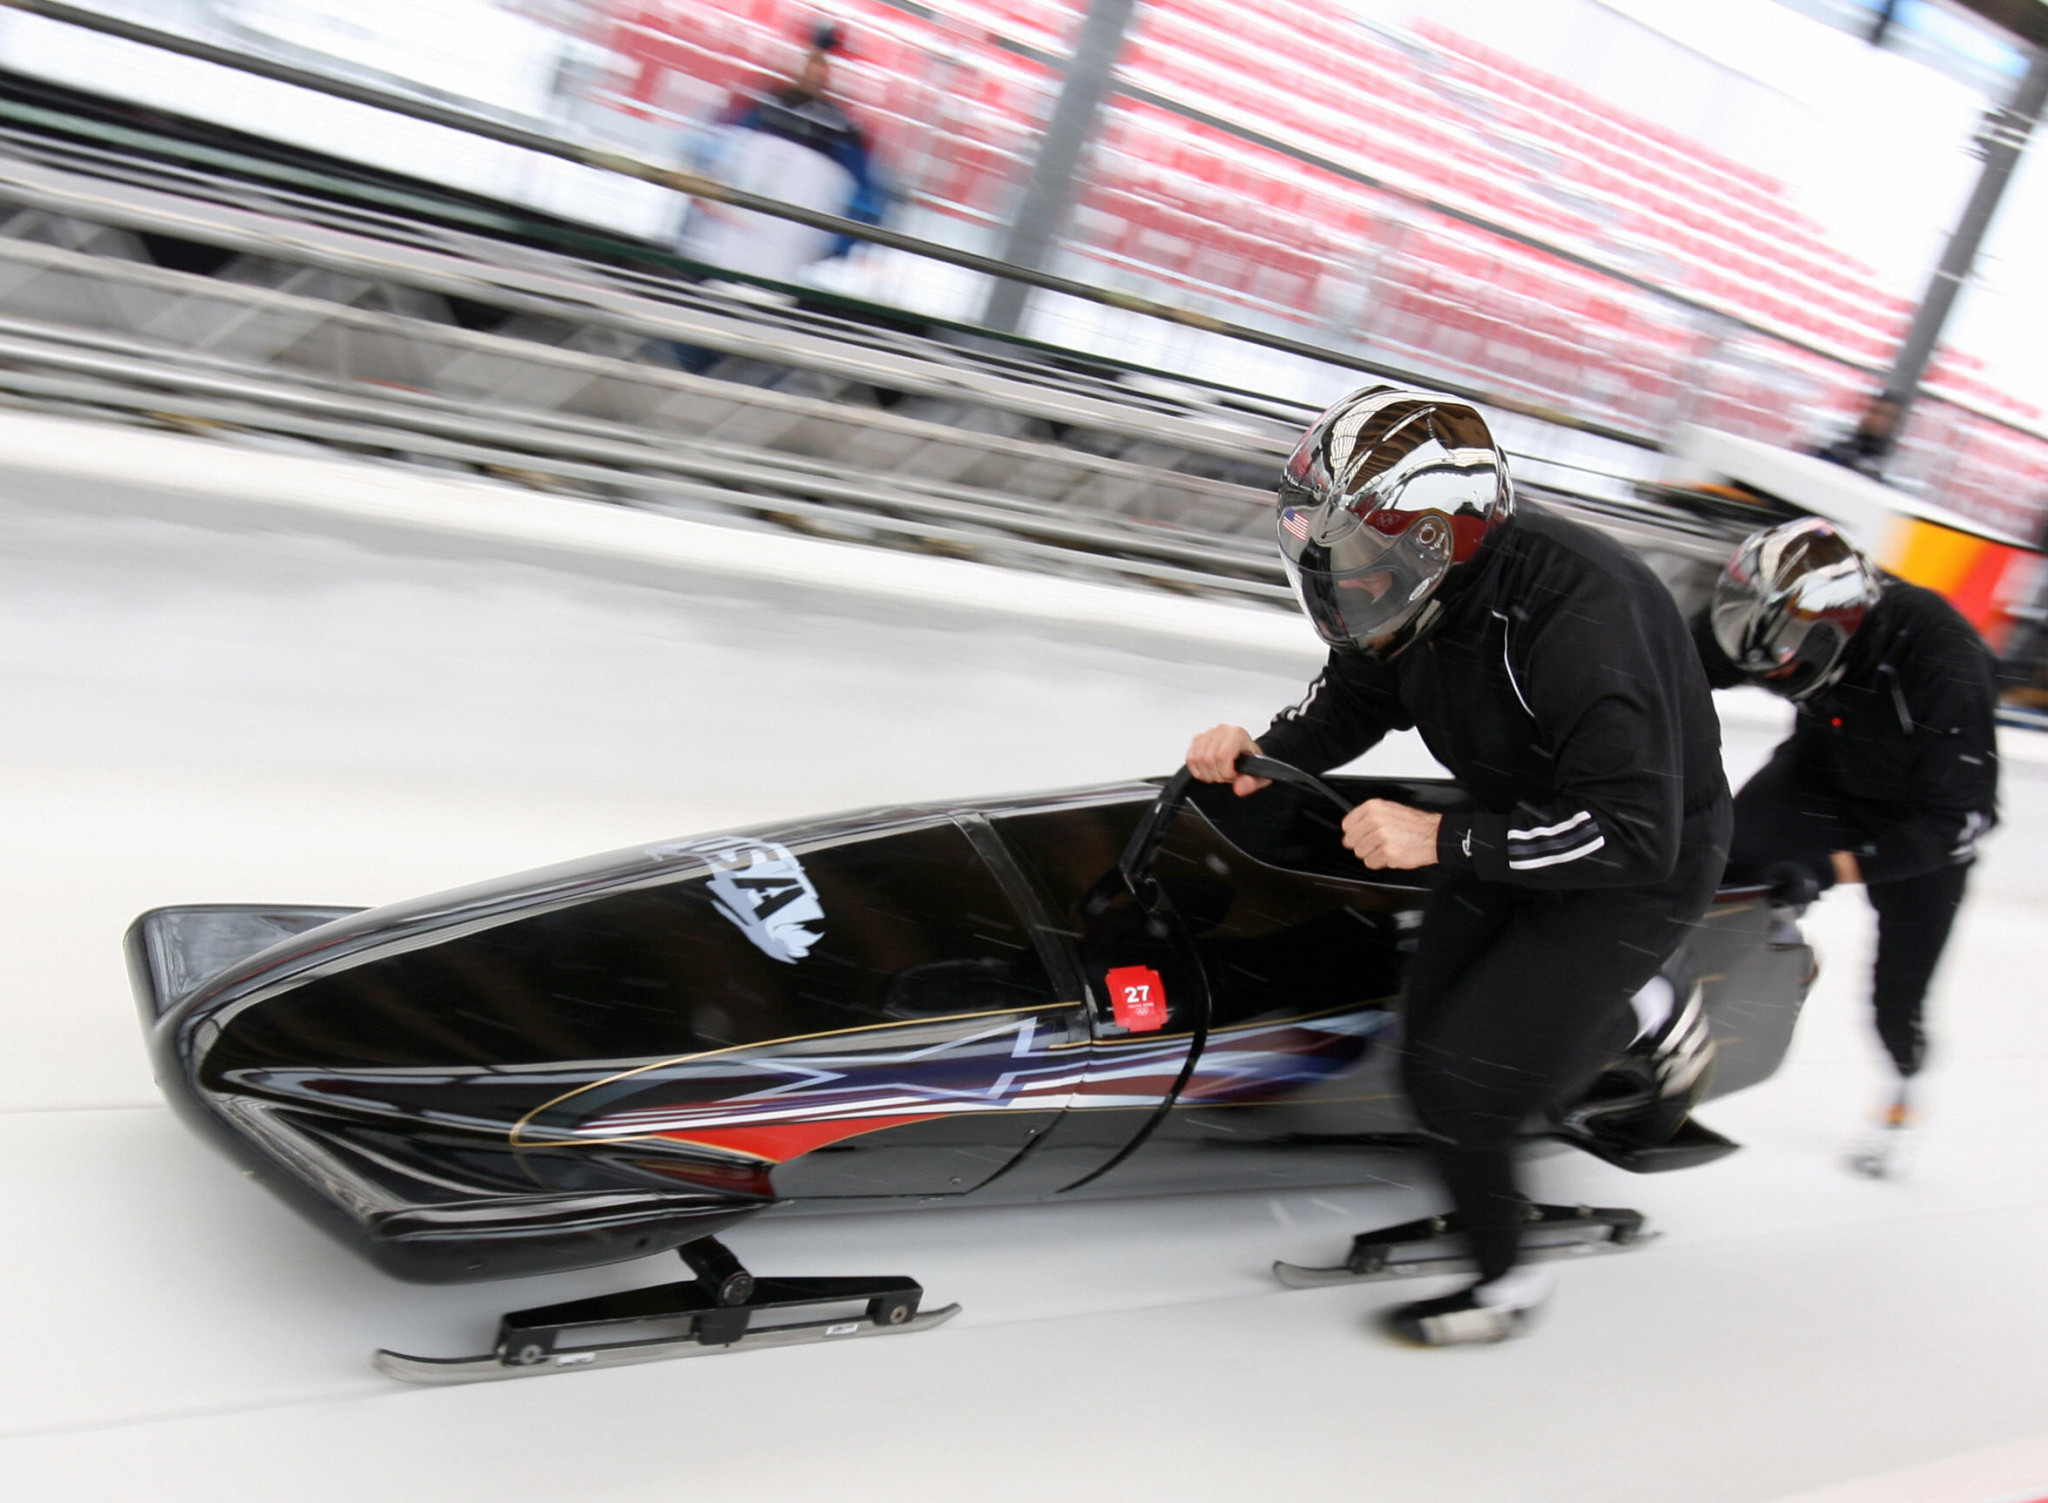 Todd Hays is an Olympic medal winning bobsleigh pilot and will continue to head the Canadian bobsleigh team ©Getty Images